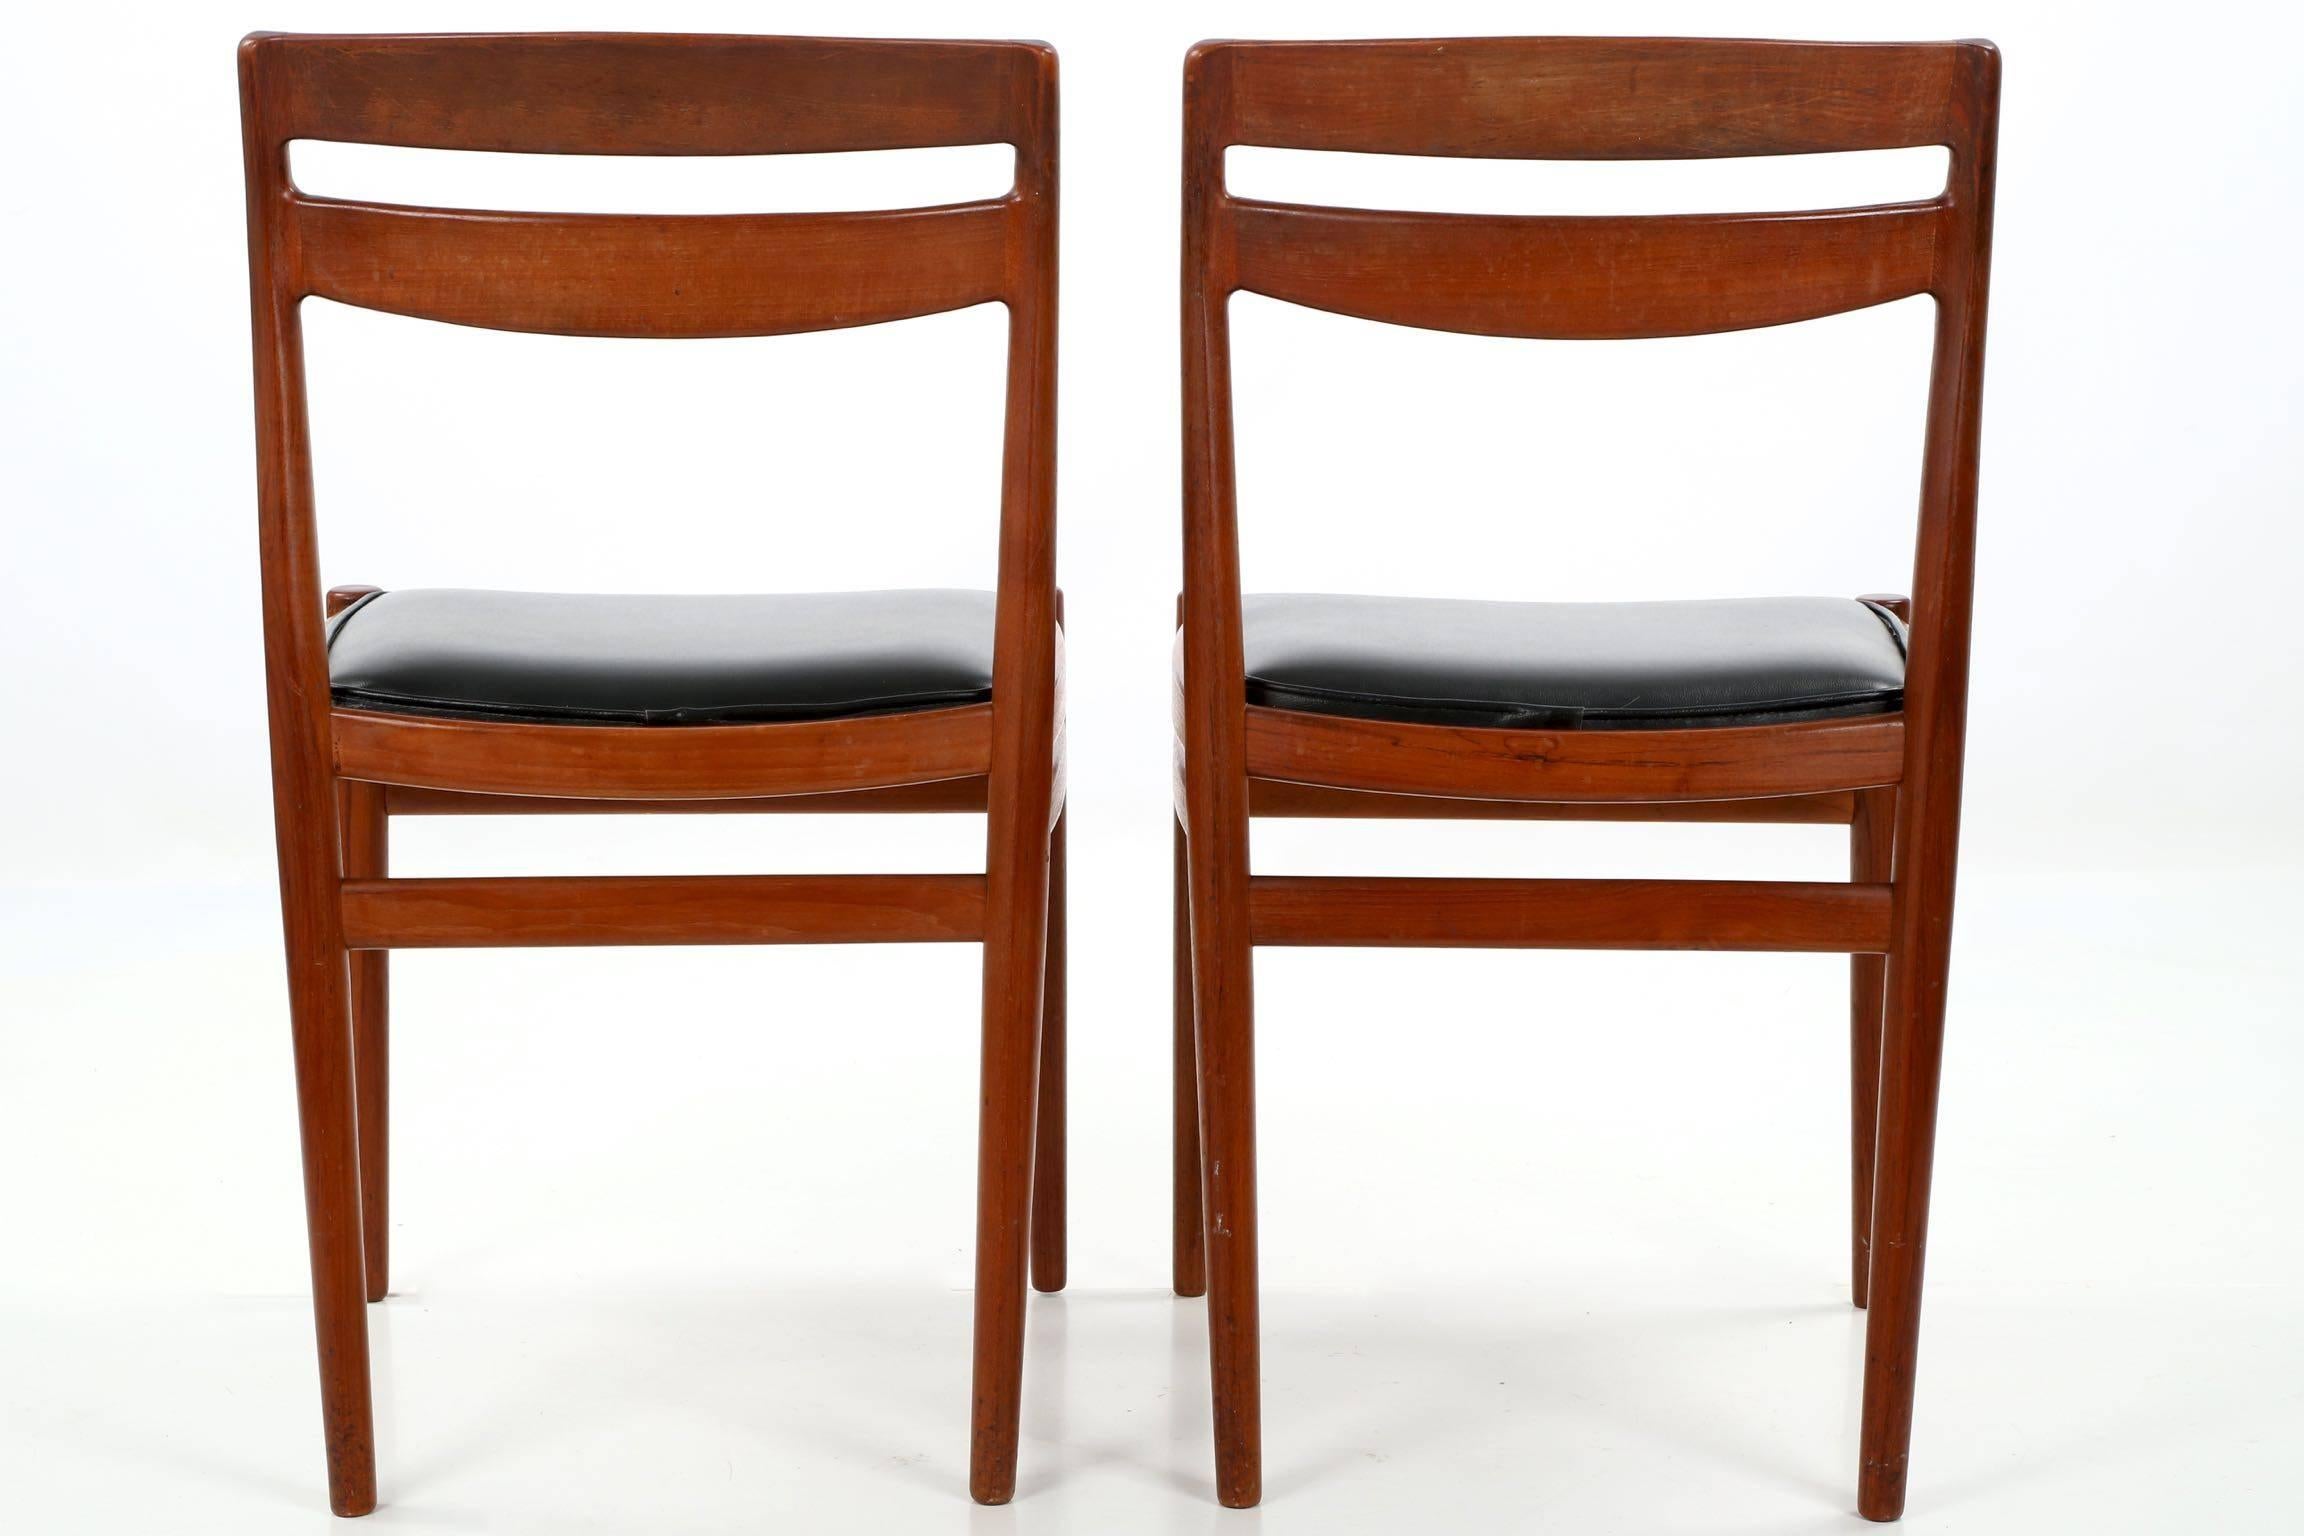 Faux Leather Four Danish Mid-Century Modern Teakwood Side Chairs, Retailed by Leo Spivak Inc.